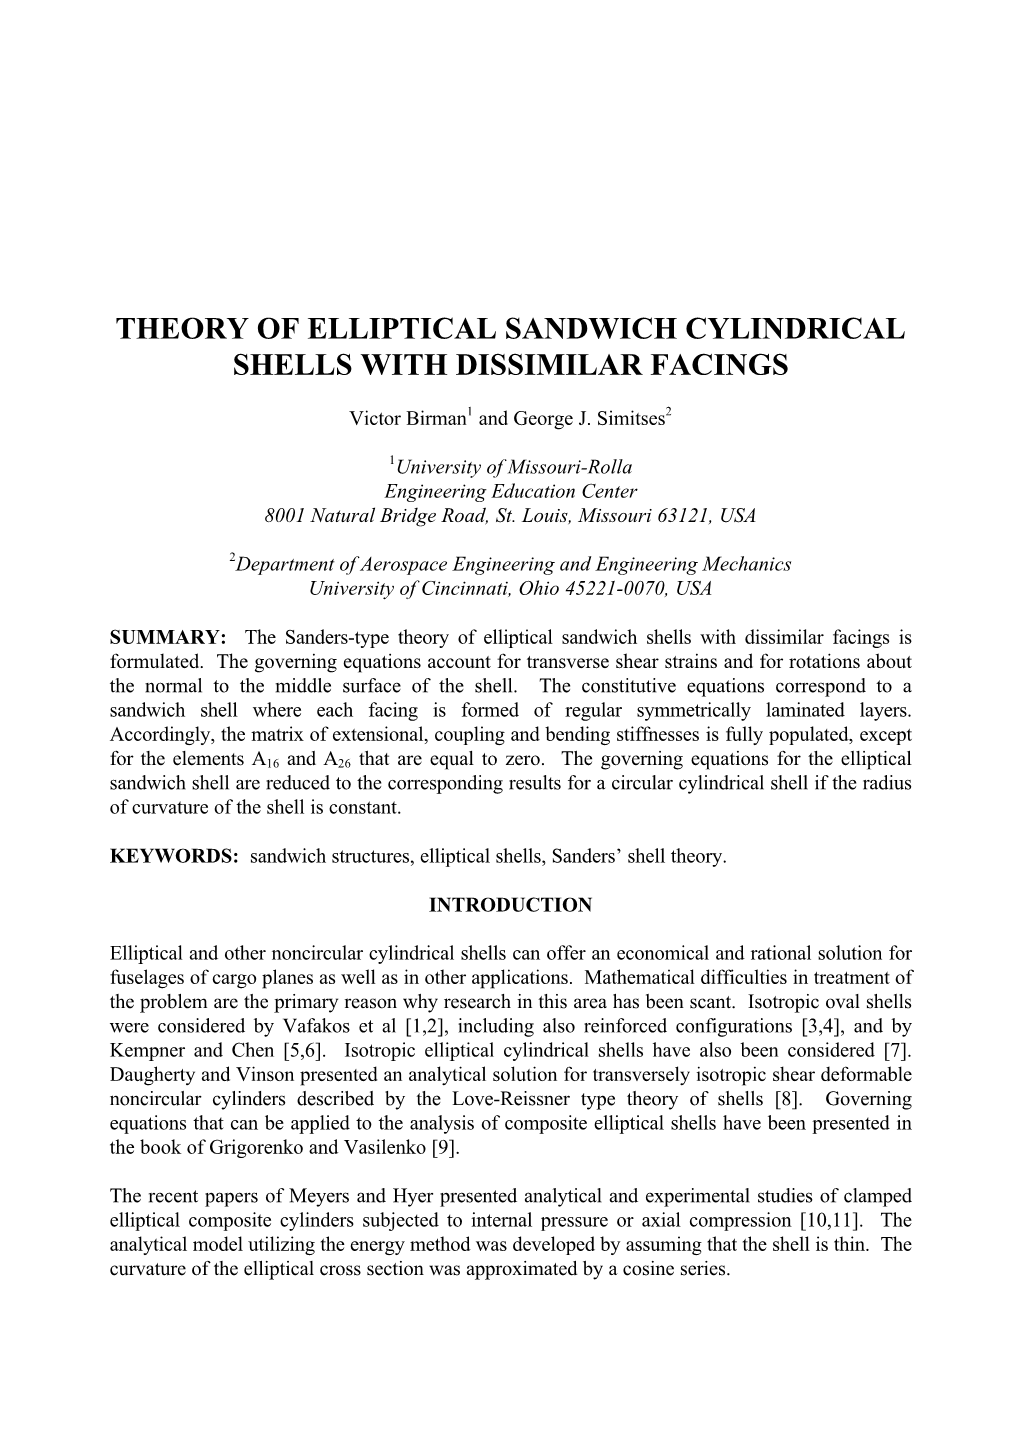 Theory of Elliptical Sandwich Cylindrical Shells with Dissimilar Facings